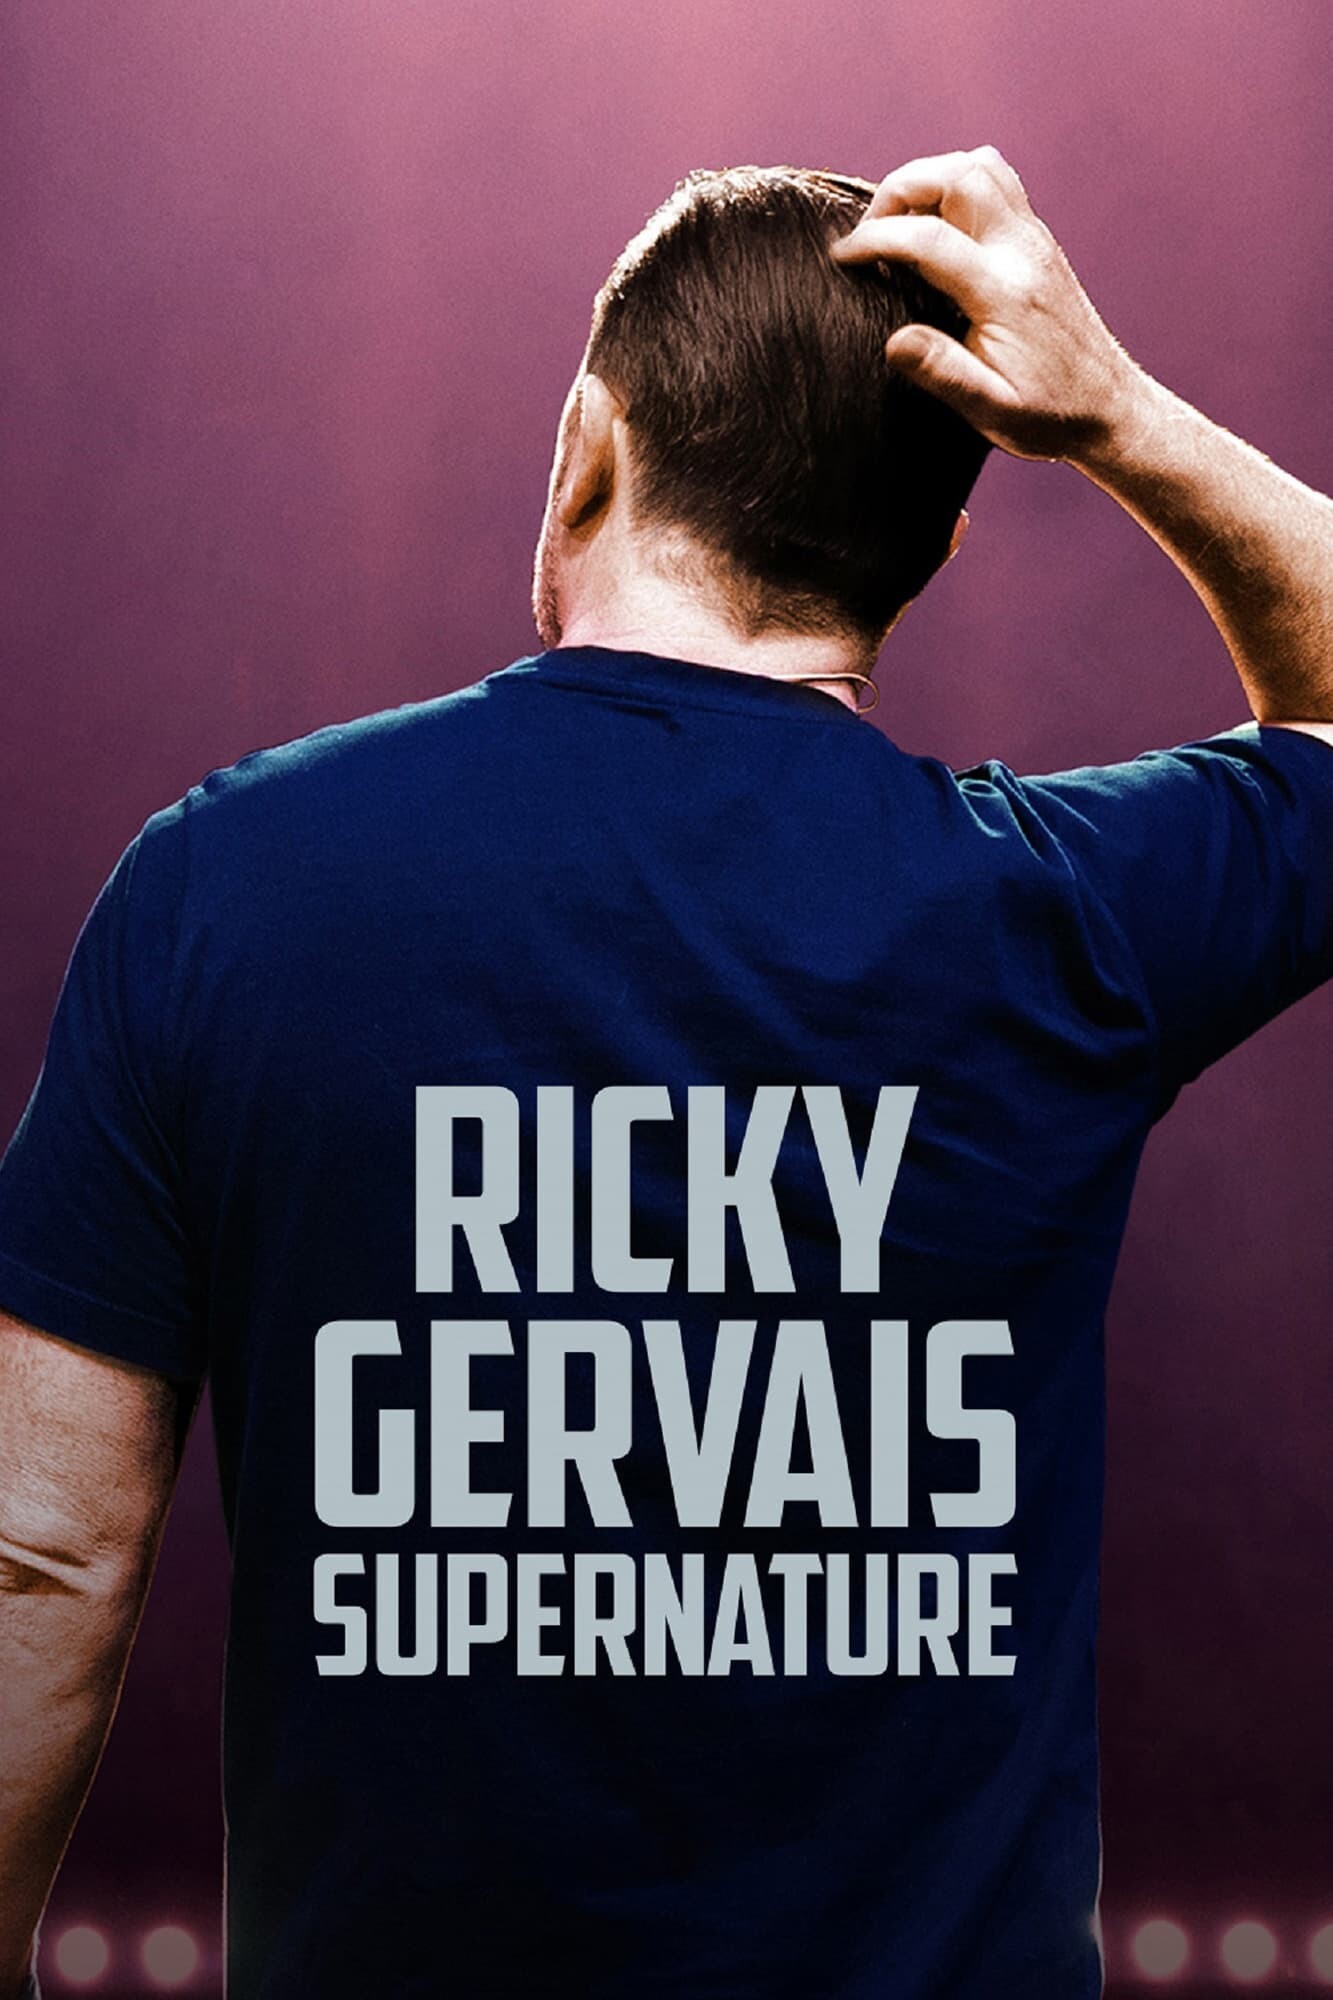 Ricky Gervais SuperNature 2022 2160p NF WEB-DL DDP5 1 Atmos H 265-RiCKY